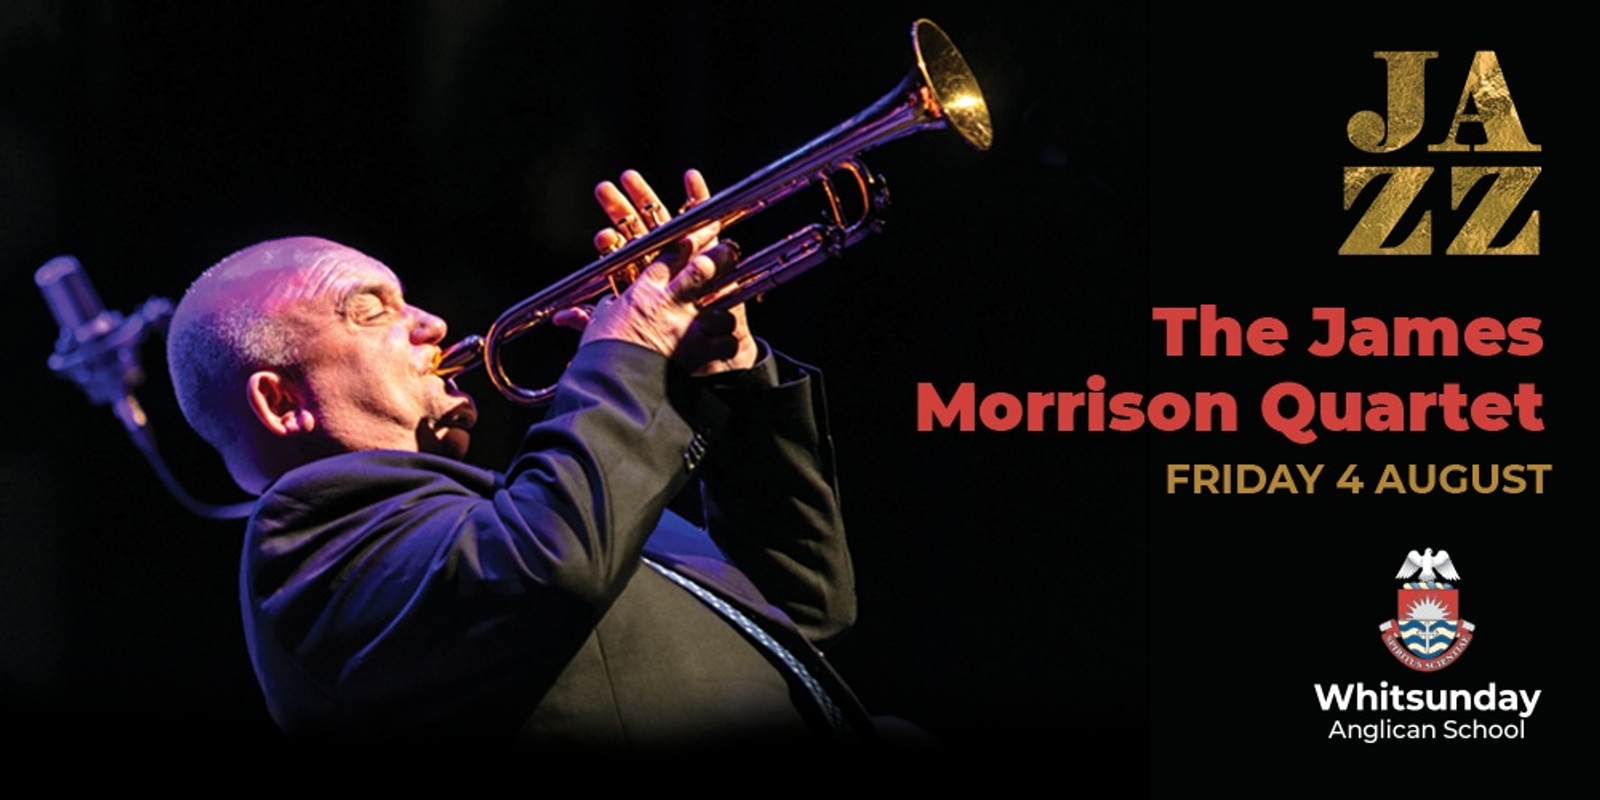 Banner image for The James Morrison Quartet at Whitsunday Anglican School